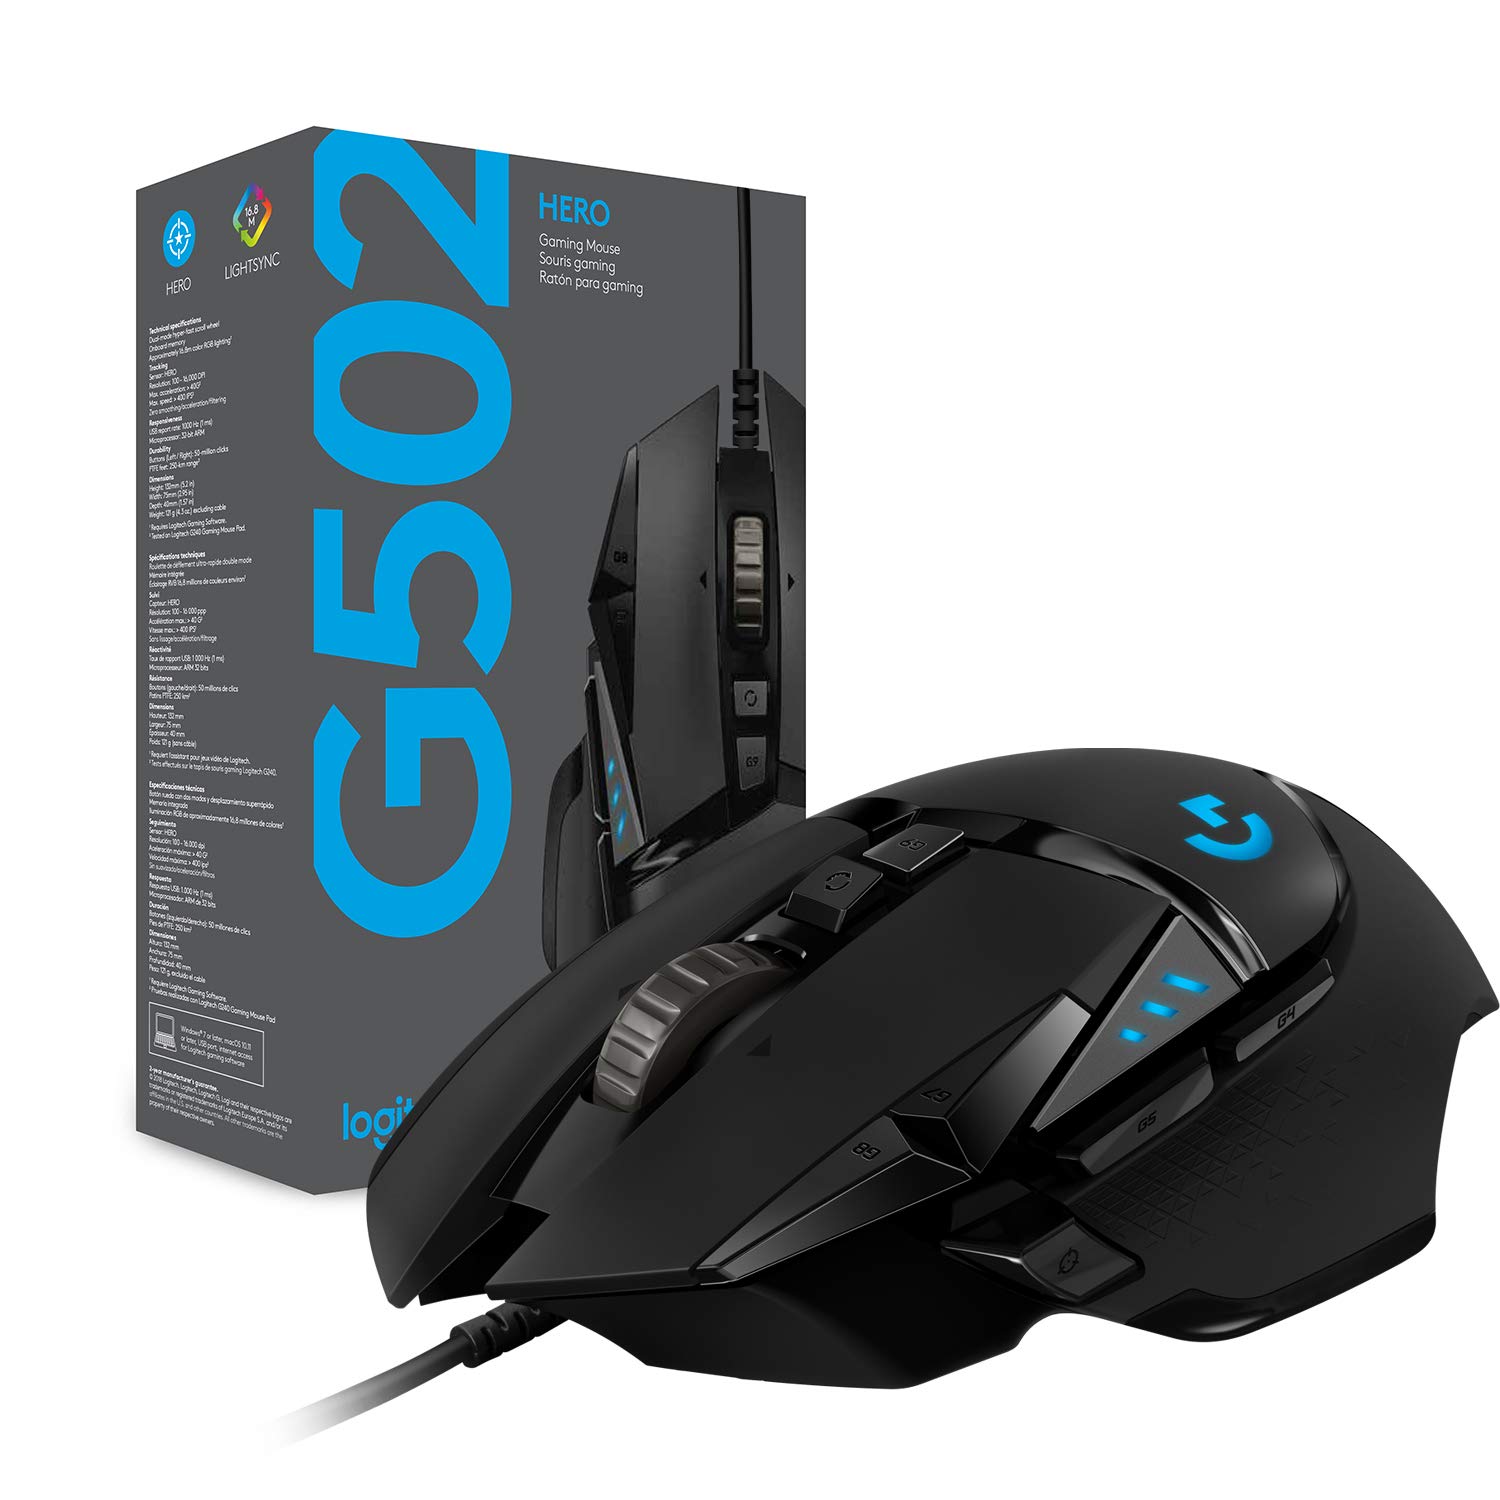 Logitech G502 HERO High Performance 25,600 DPI, RGB Wired Gaming Mouse $35 + Free Shipping